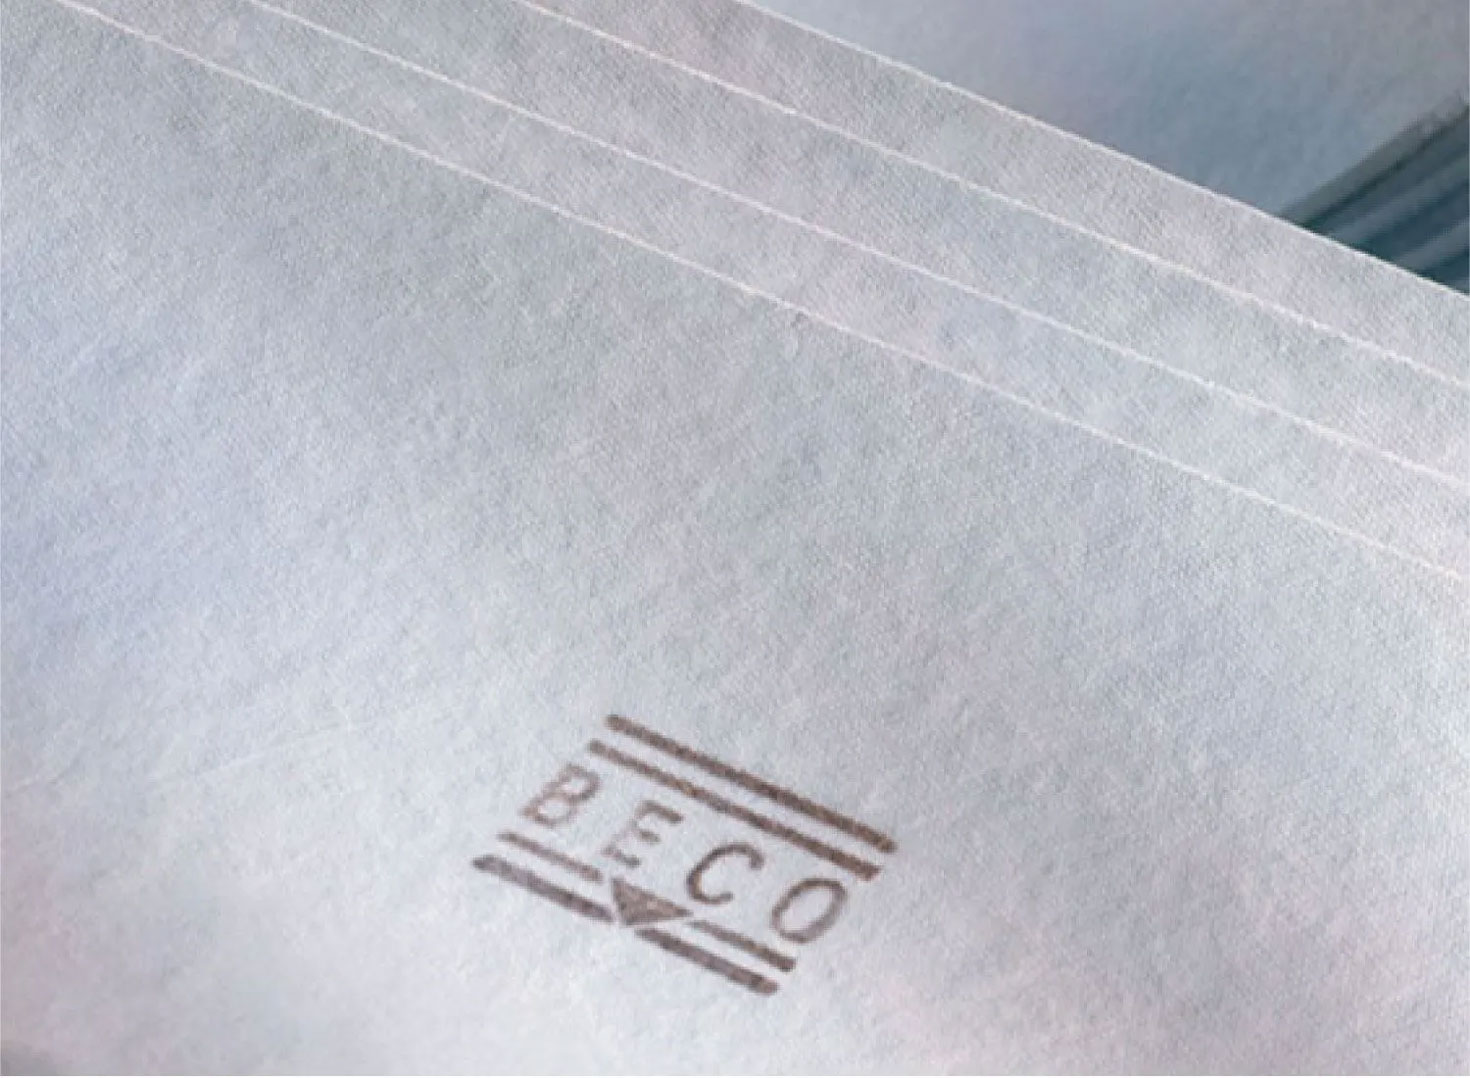 Beco filter sheets